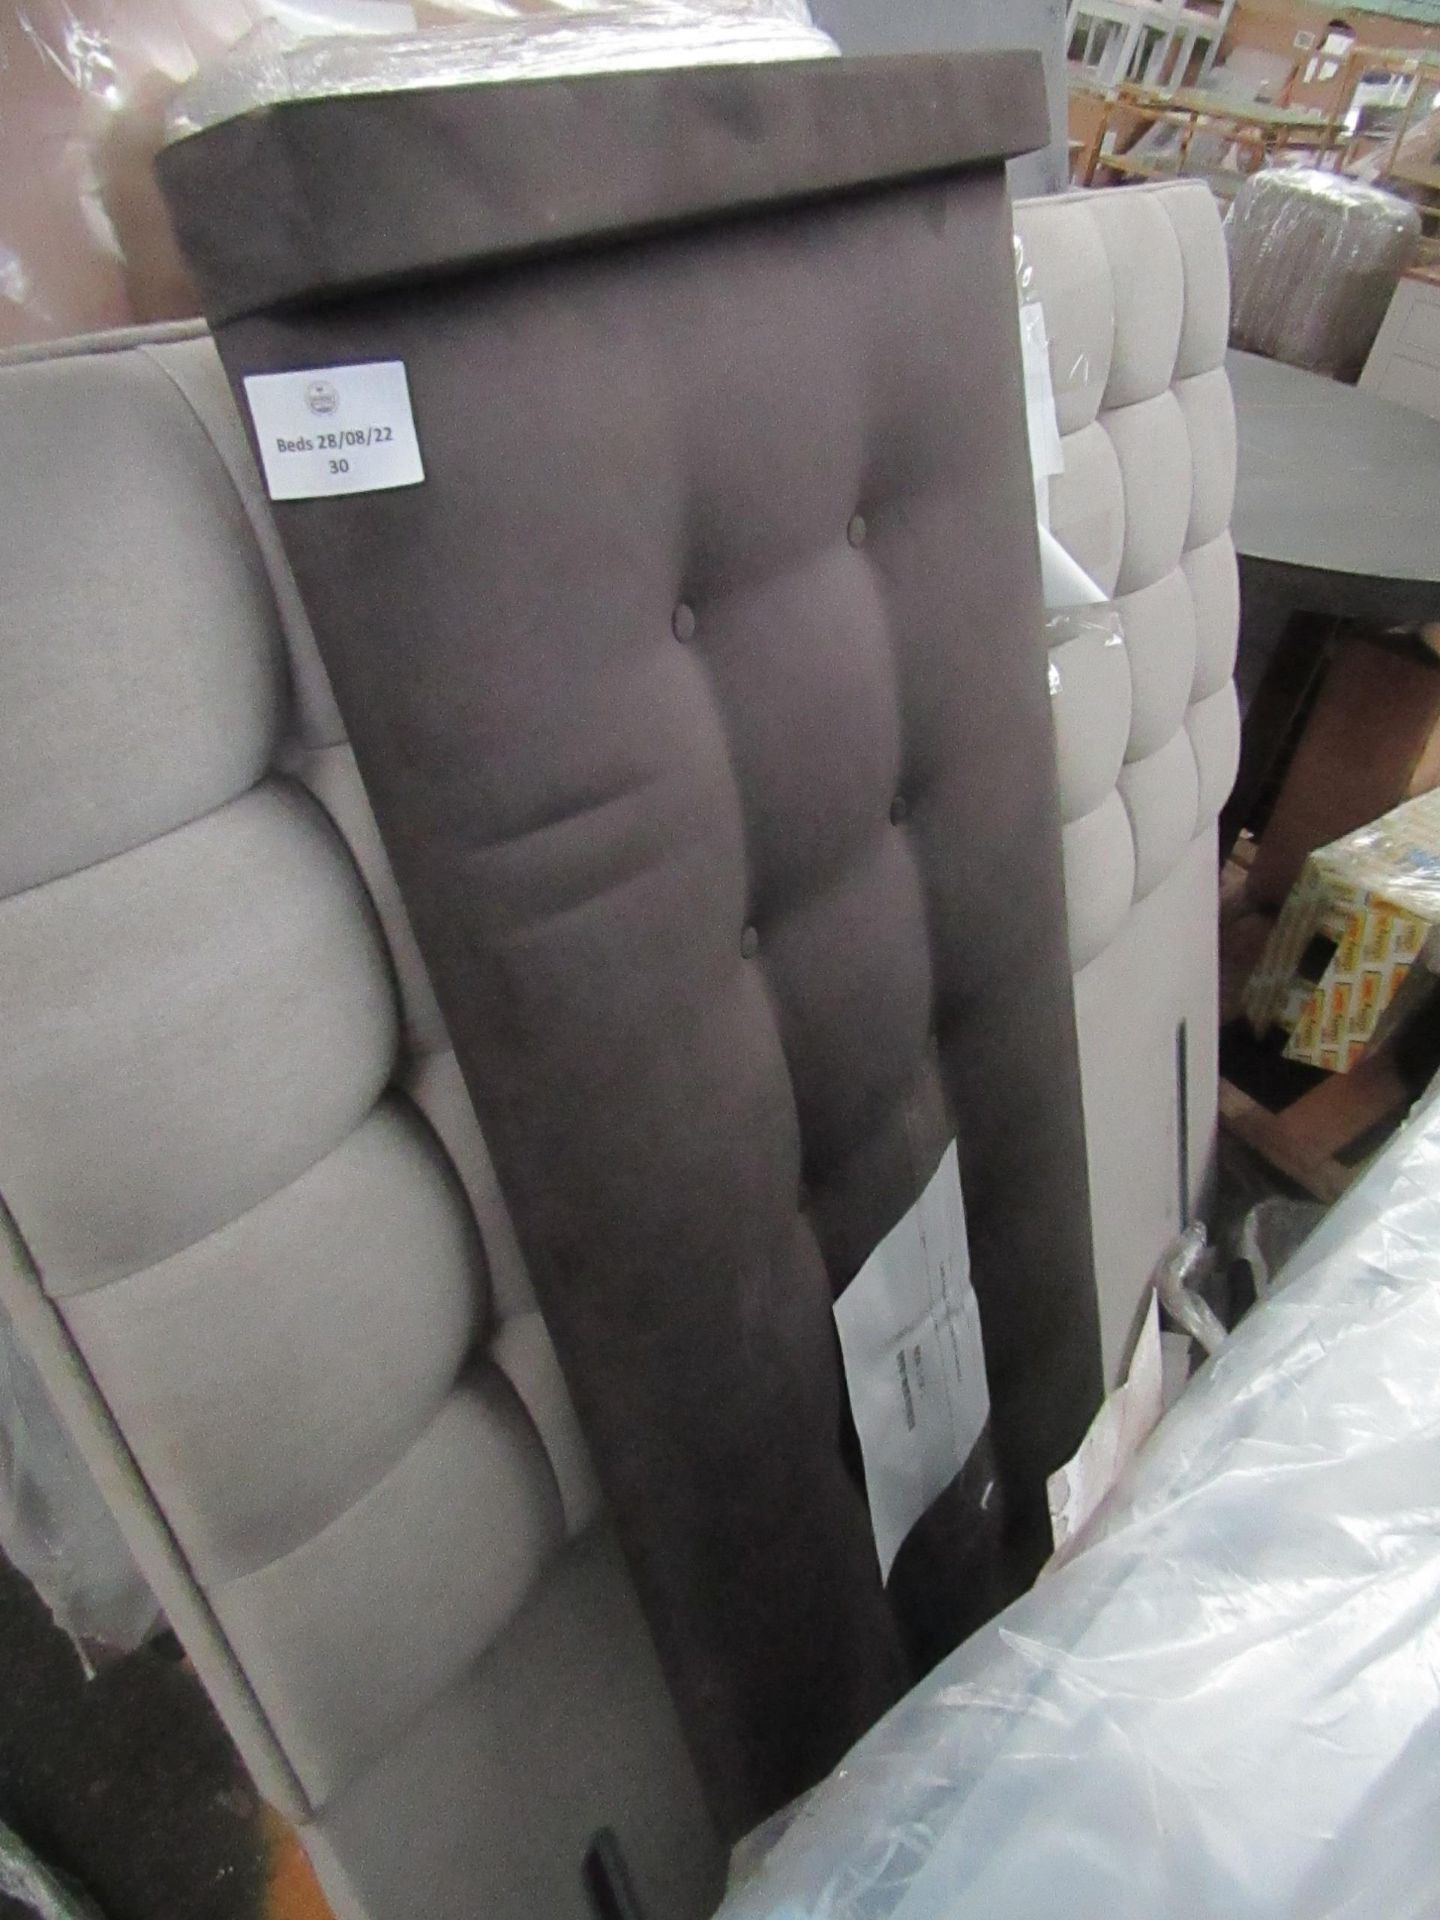 | 1X | SLEEPEEZEE FLORIDA 5FT KING SIZE HEADBOARD IN NOIR | LOOKS IN GOOD CONDITION NO PACKAGING - - Image 2 of 2